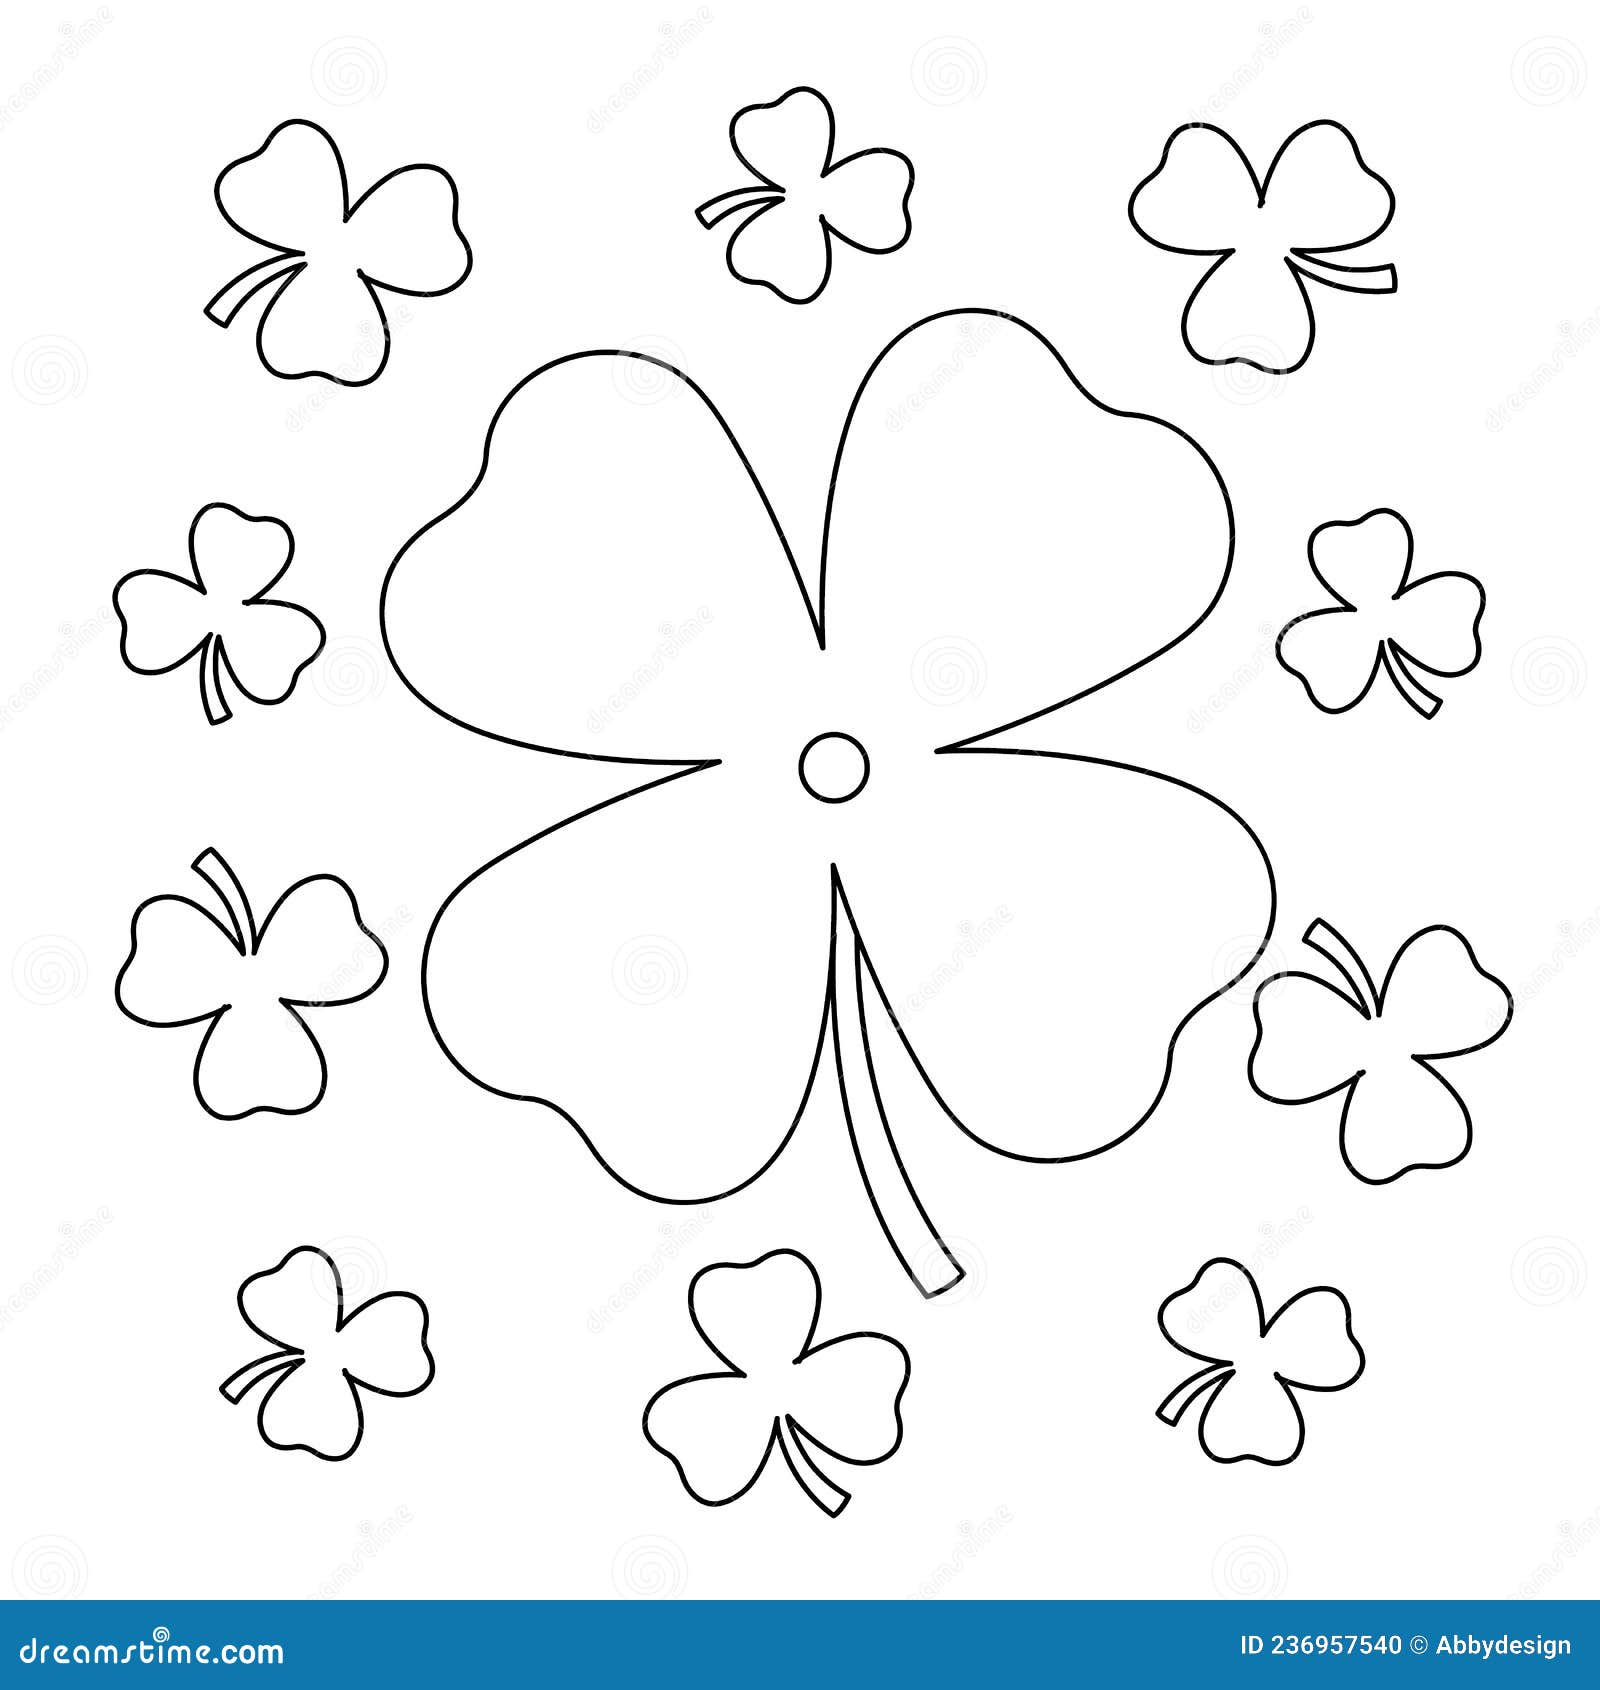 St patricks day shamrock coloring page for kids stock vector